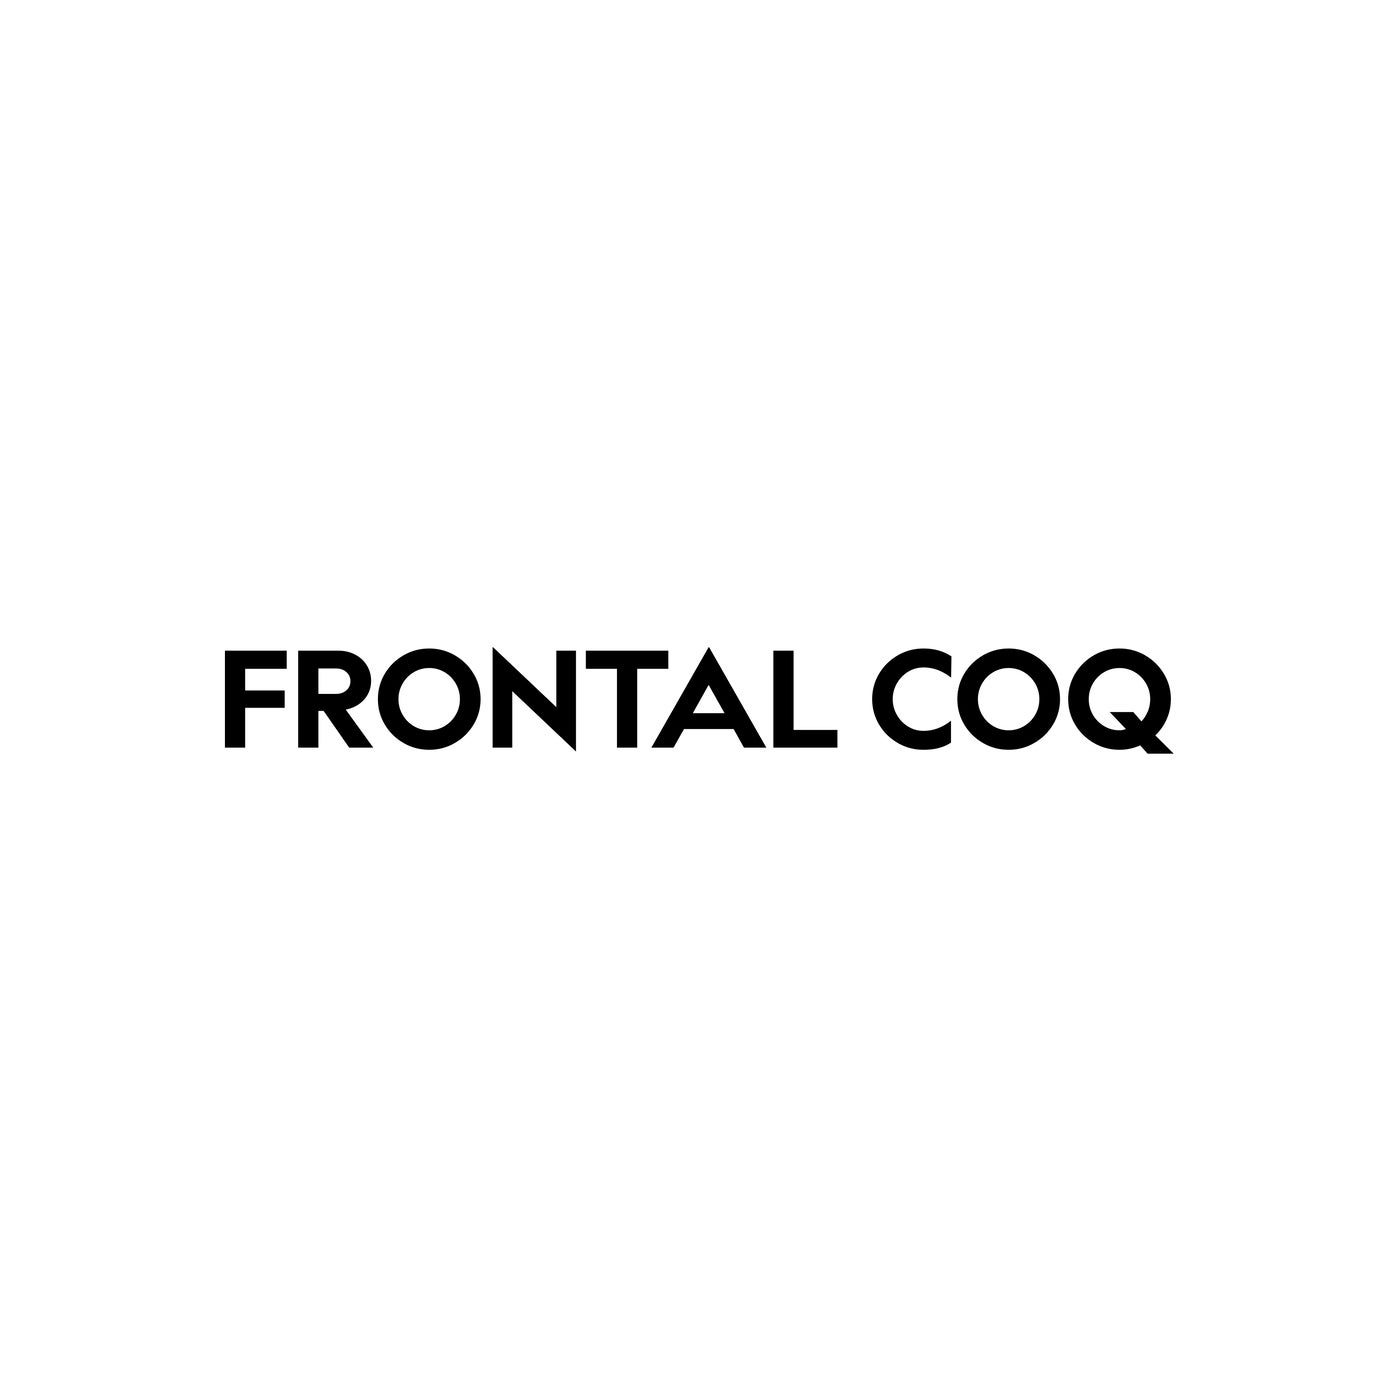 Frontal Coq